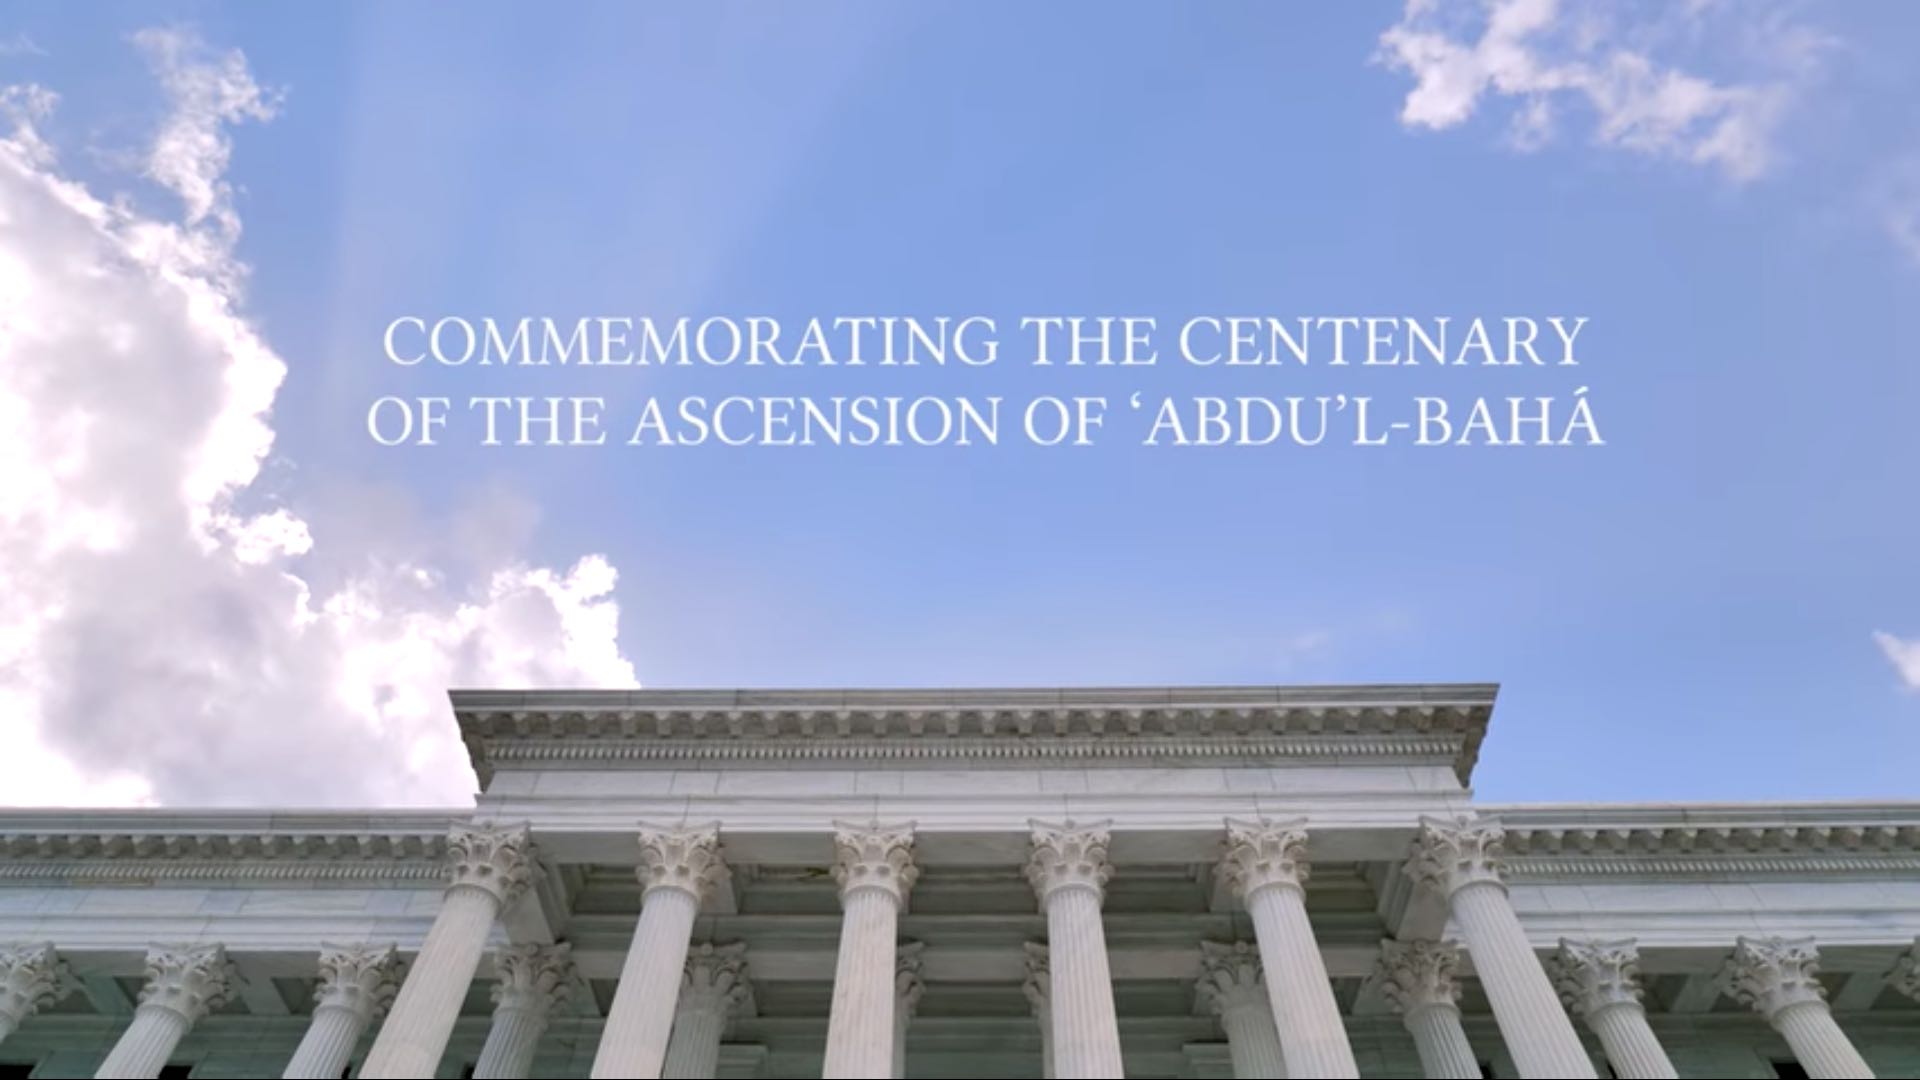 “Commemorating the Centenary of the Ascension of ʻAbdu’l-Bahá”